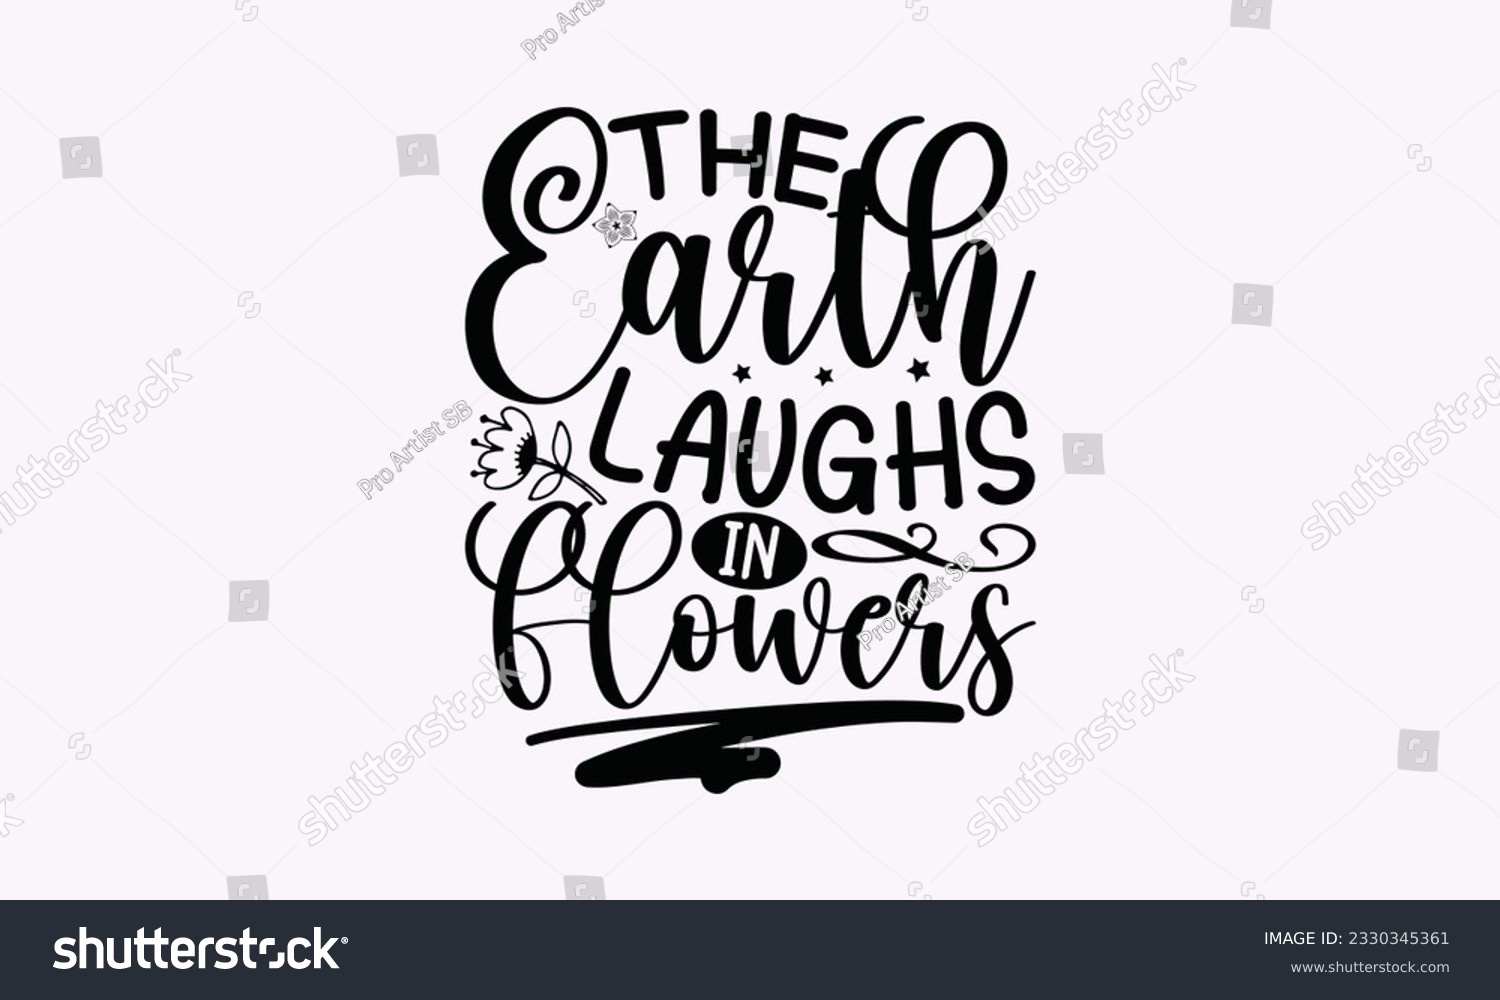 SVG of The earth laughs in flowers - Gardening SVG Design, Flower Quotes, Calligraphy graphic design, Typography poster with old style camera and quote. svg